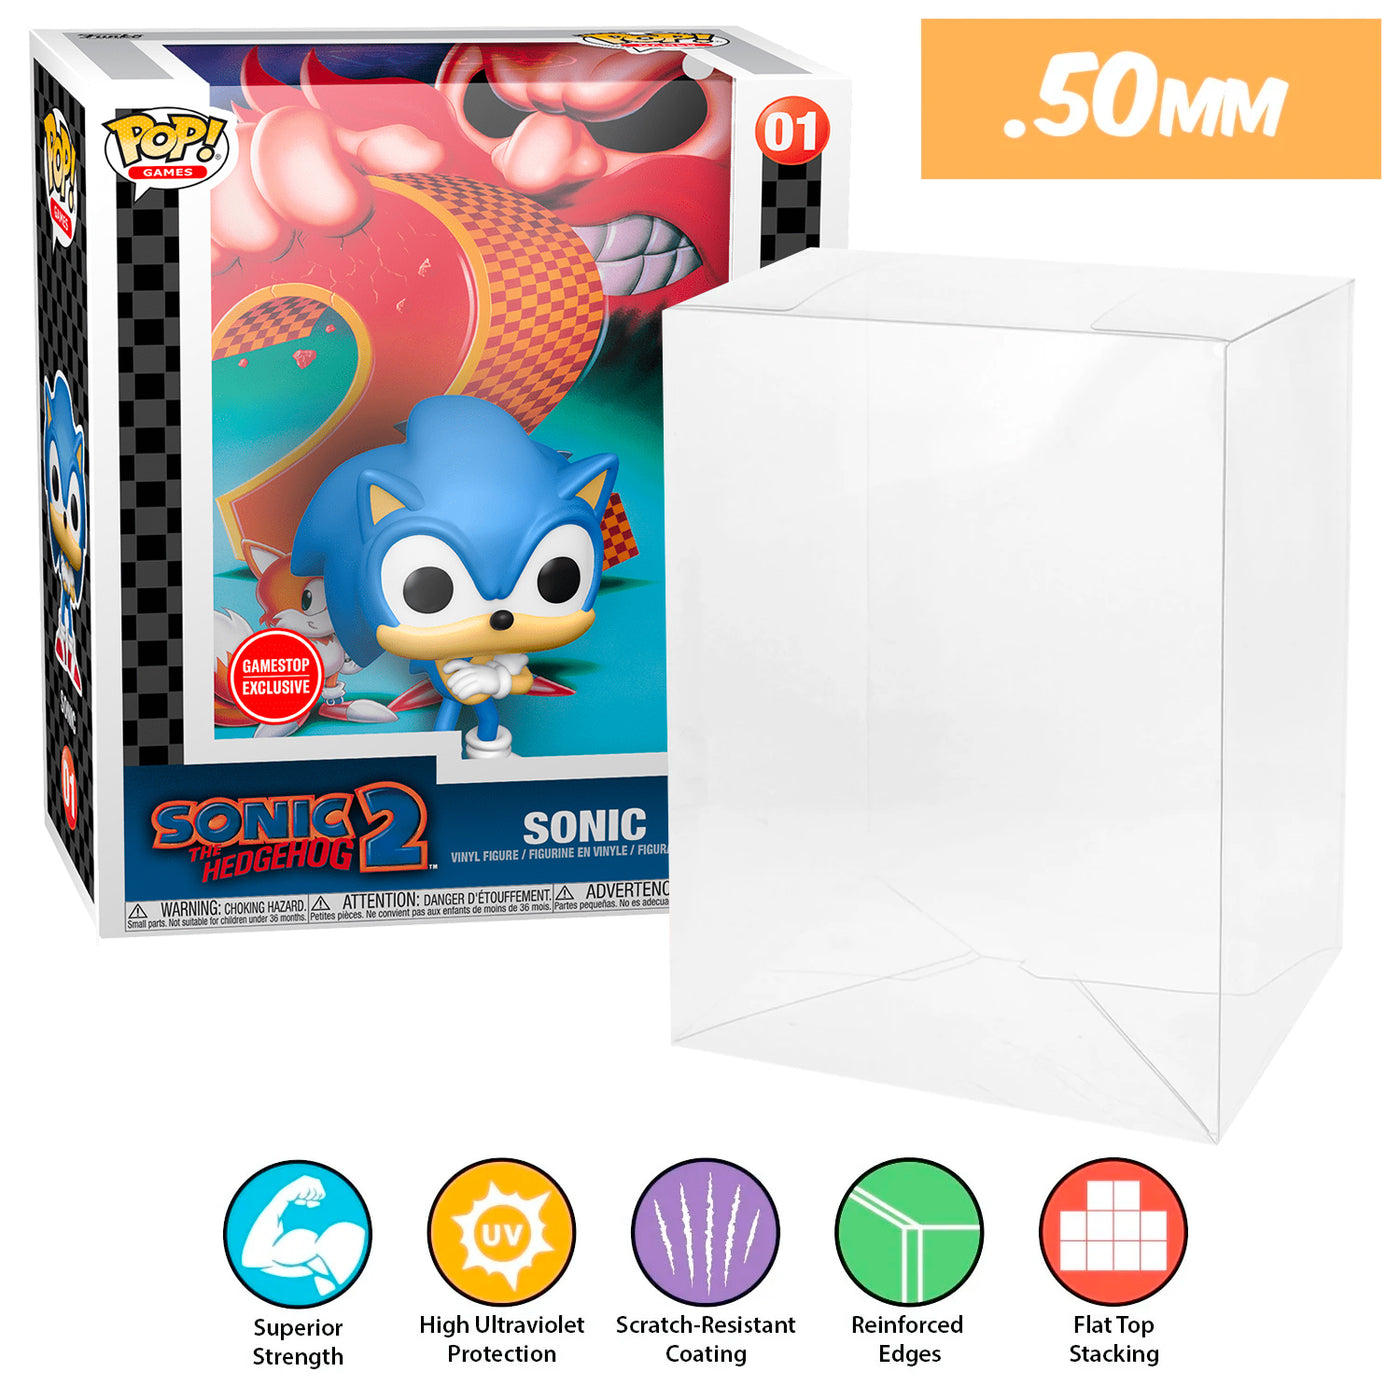 01 sonic the hedgehog 2 pop game covers best funko pop protectors thick strong uv scratch flat top stack vinyl display geek plastic shield vaulted eco armor fits collect protect display case kollector protector